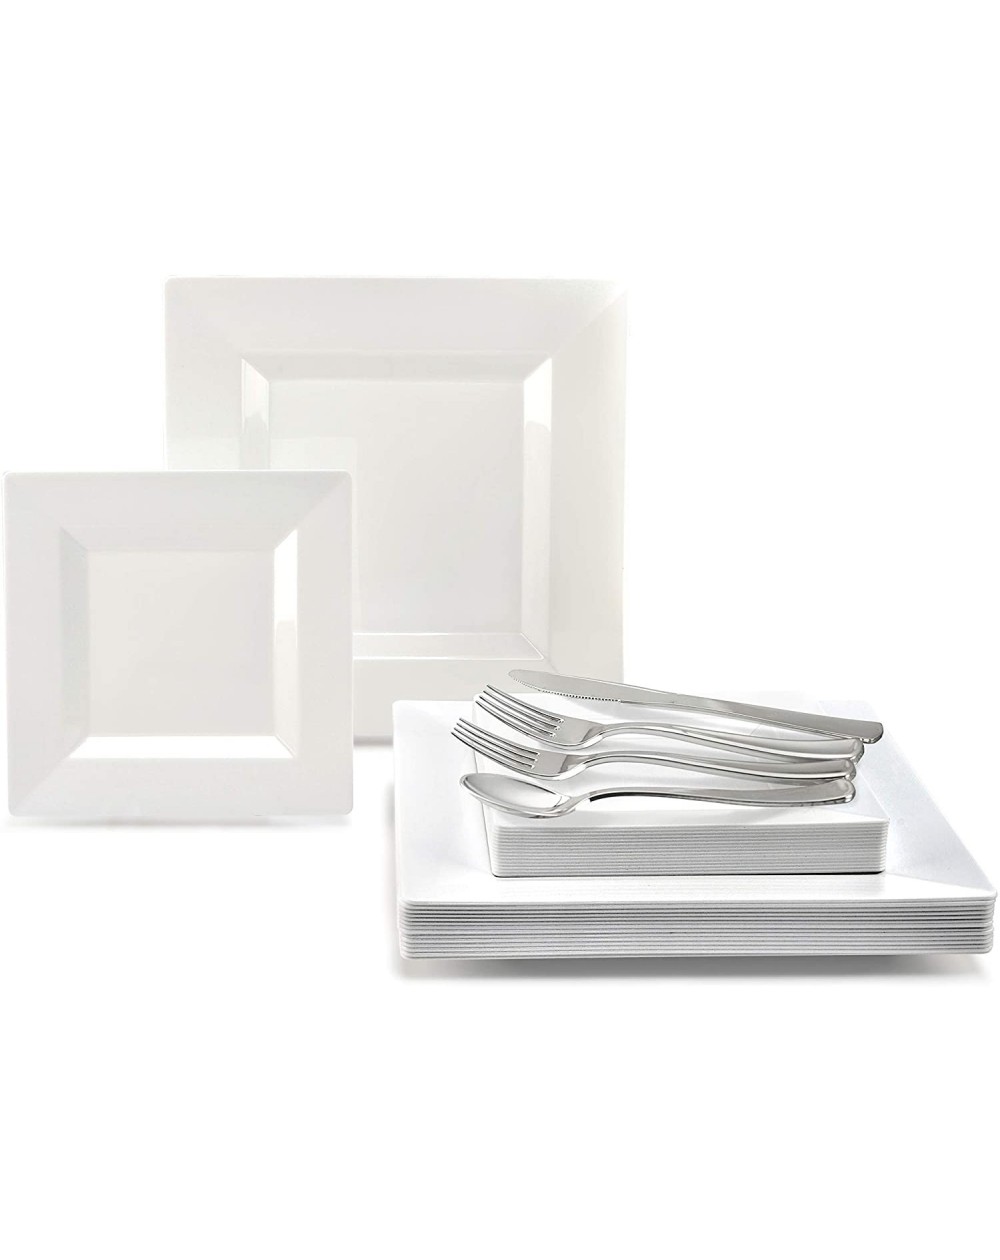 Tableware 200pcs set (25 Guests)-Heavyweight Wedding Party Disposable Plastic Plate Set -25 x 9.5" + 25 x 6.5" + Silver Silve...